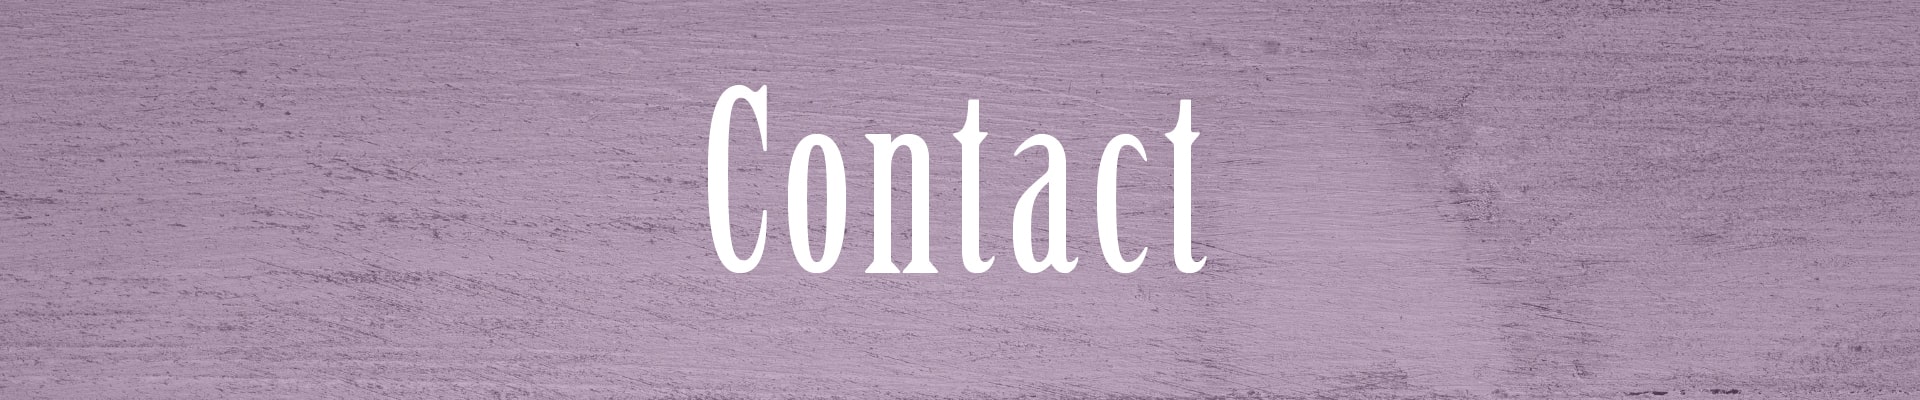 Contact page header